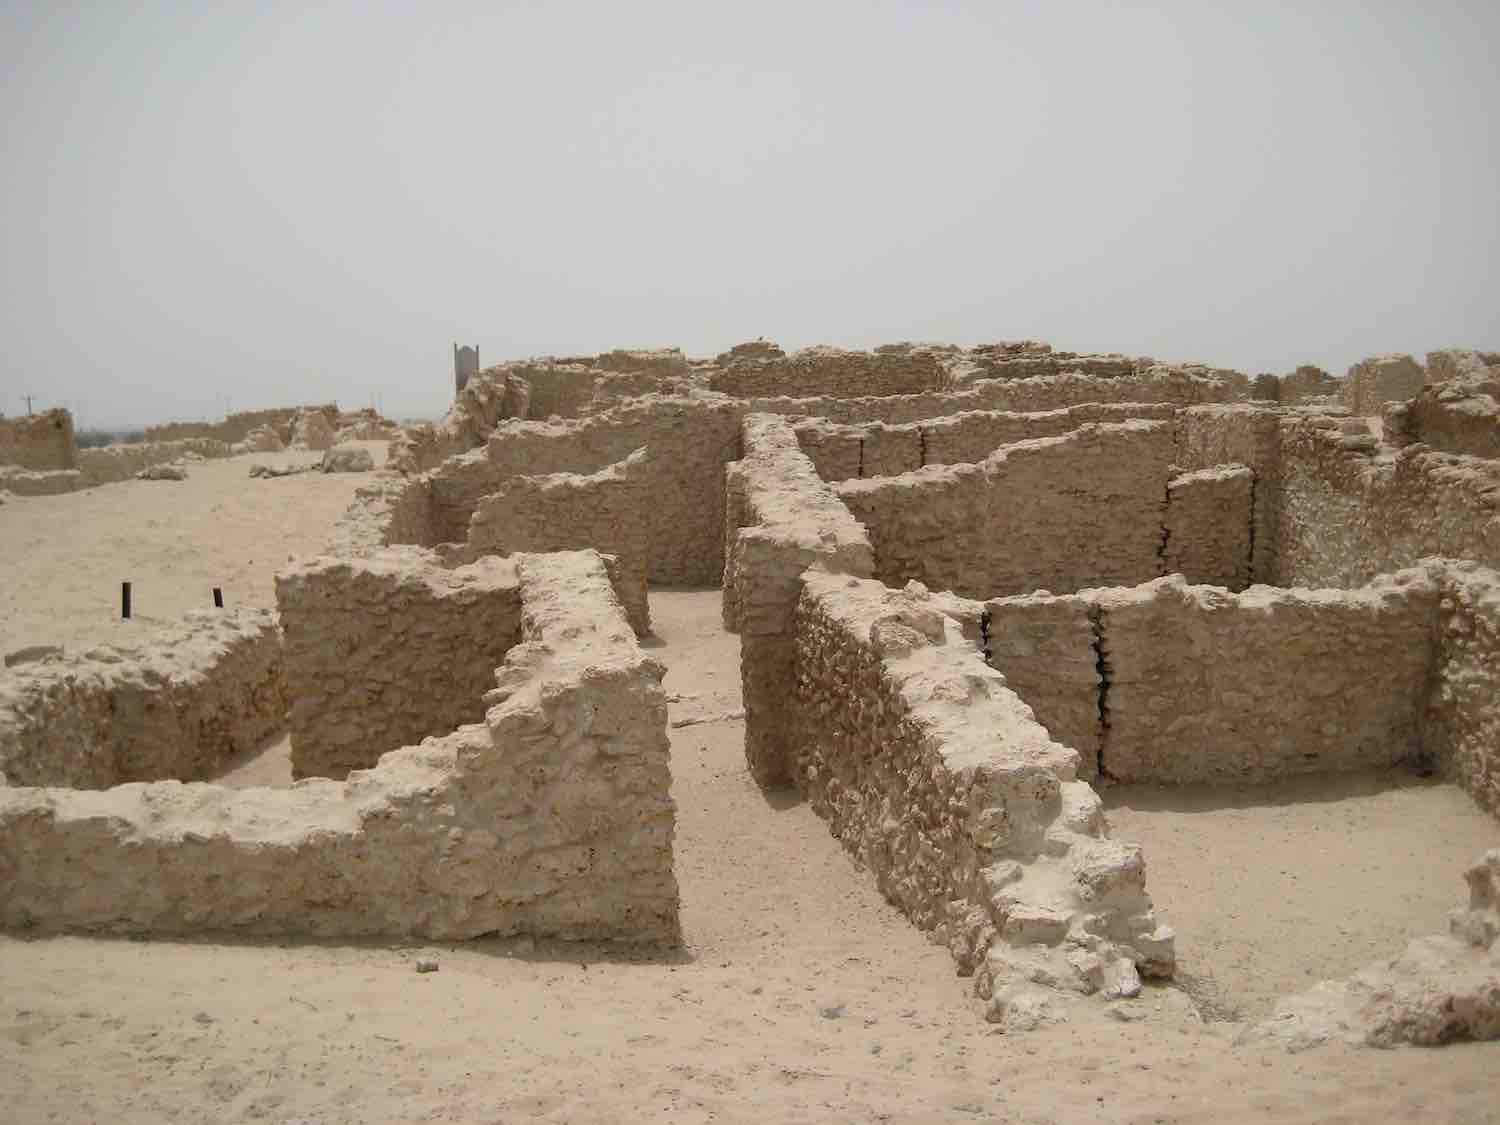 The ruins of Sumerian-era Dilmun from about 2600BC on the island today known as Bahrain in the Persian Gulf.